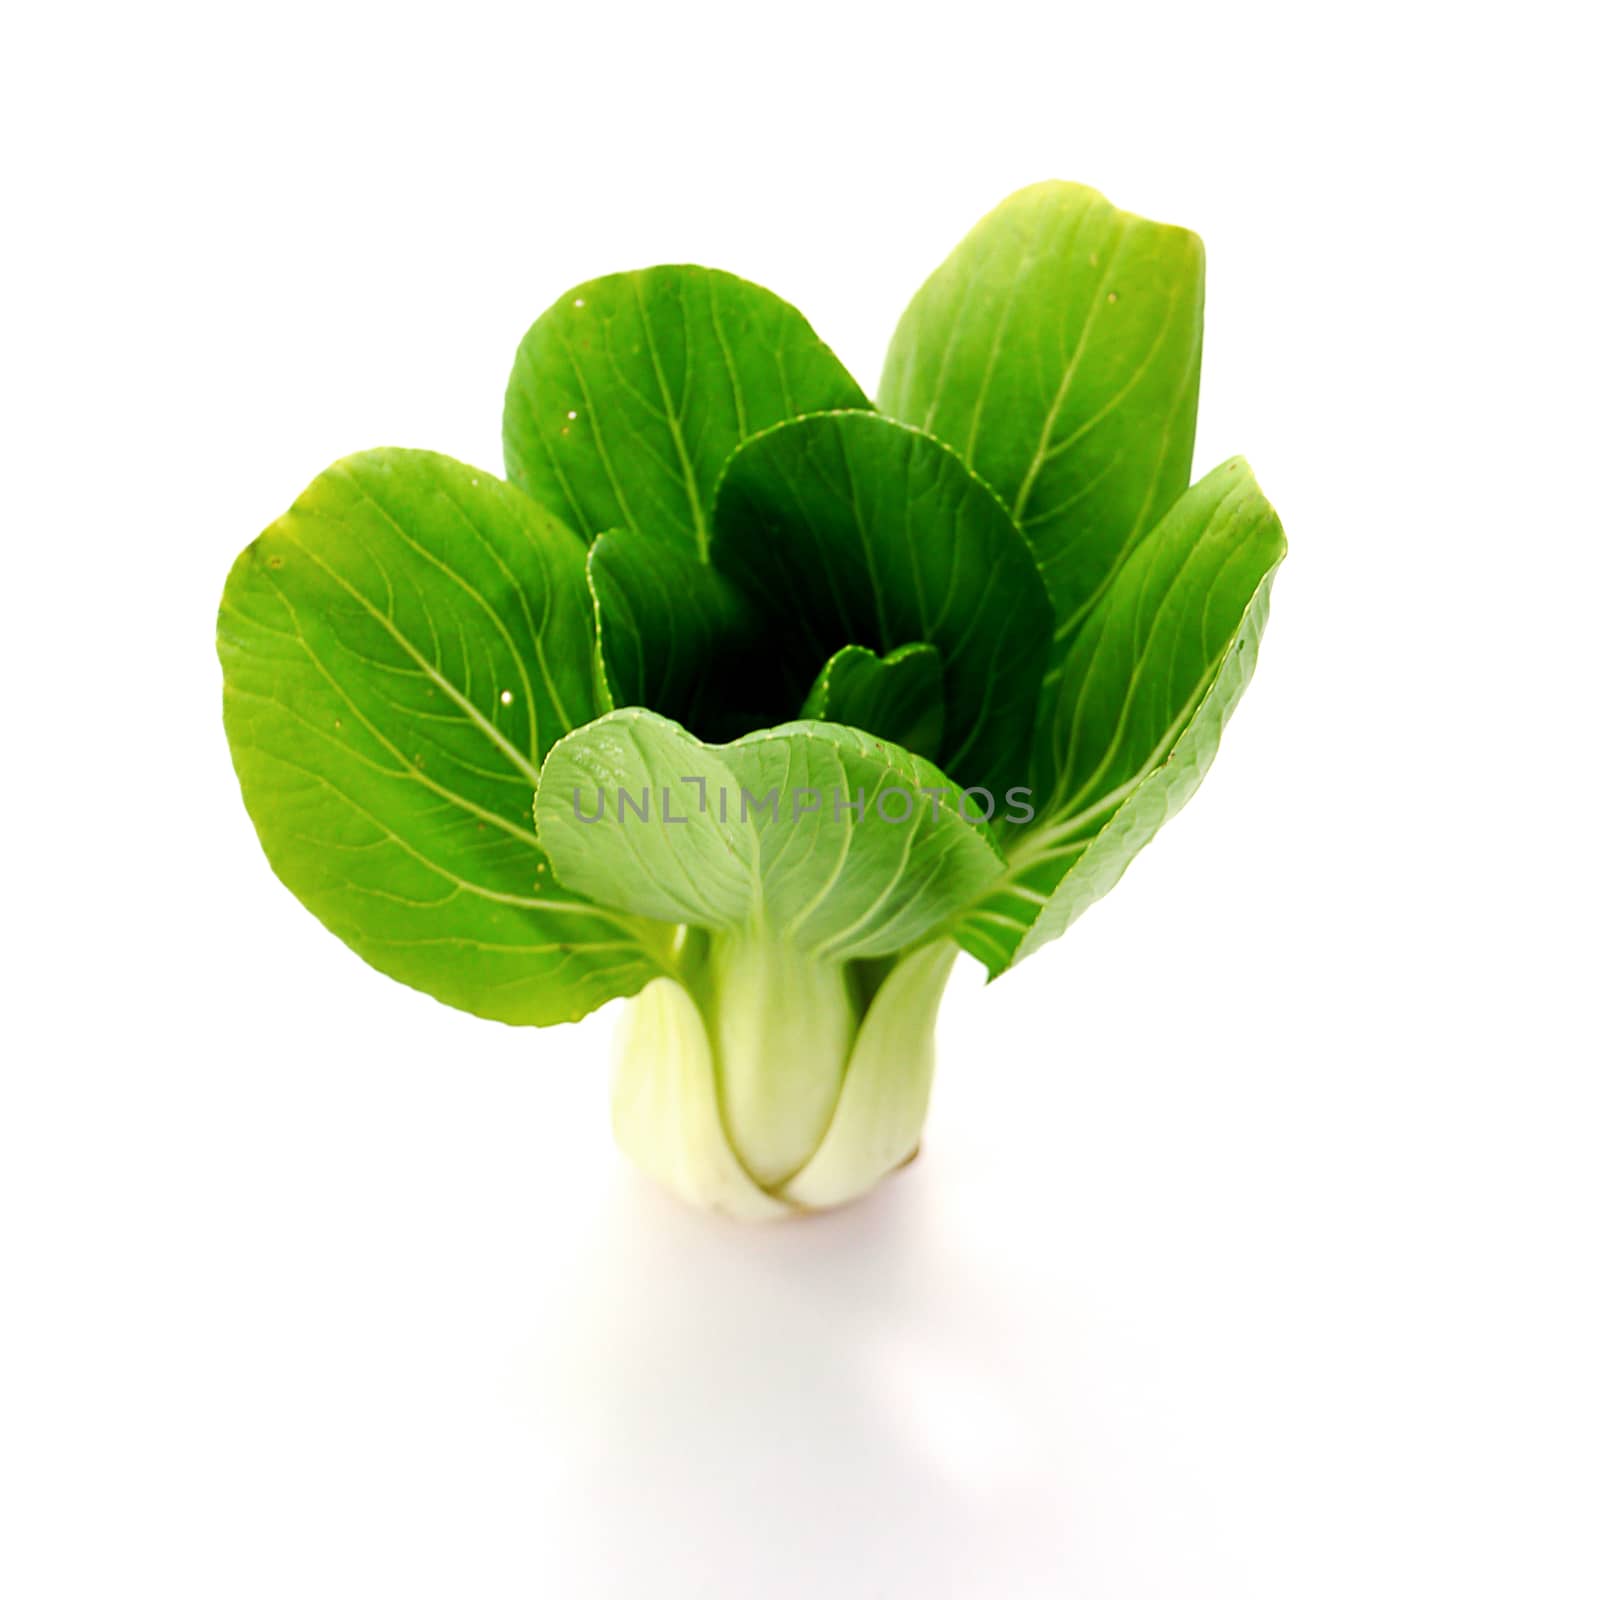 Bok choy (chinese cabbage) isolated on white by Noppharat_th